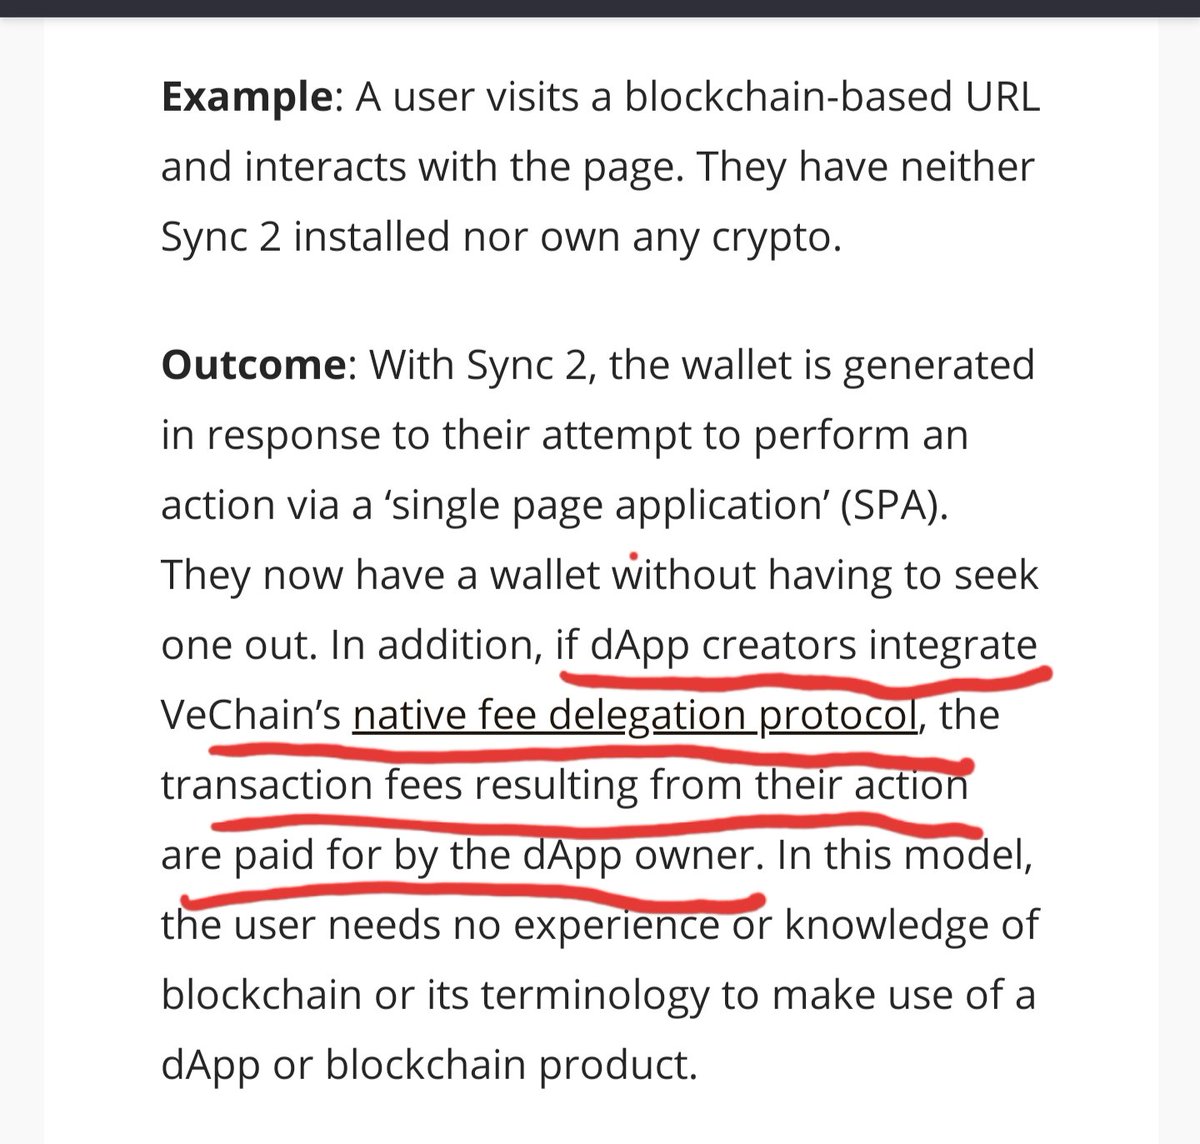 So on  #Vechain  $Vet its even possible to pay no  #transactionfees at all! because of the feedelegation.